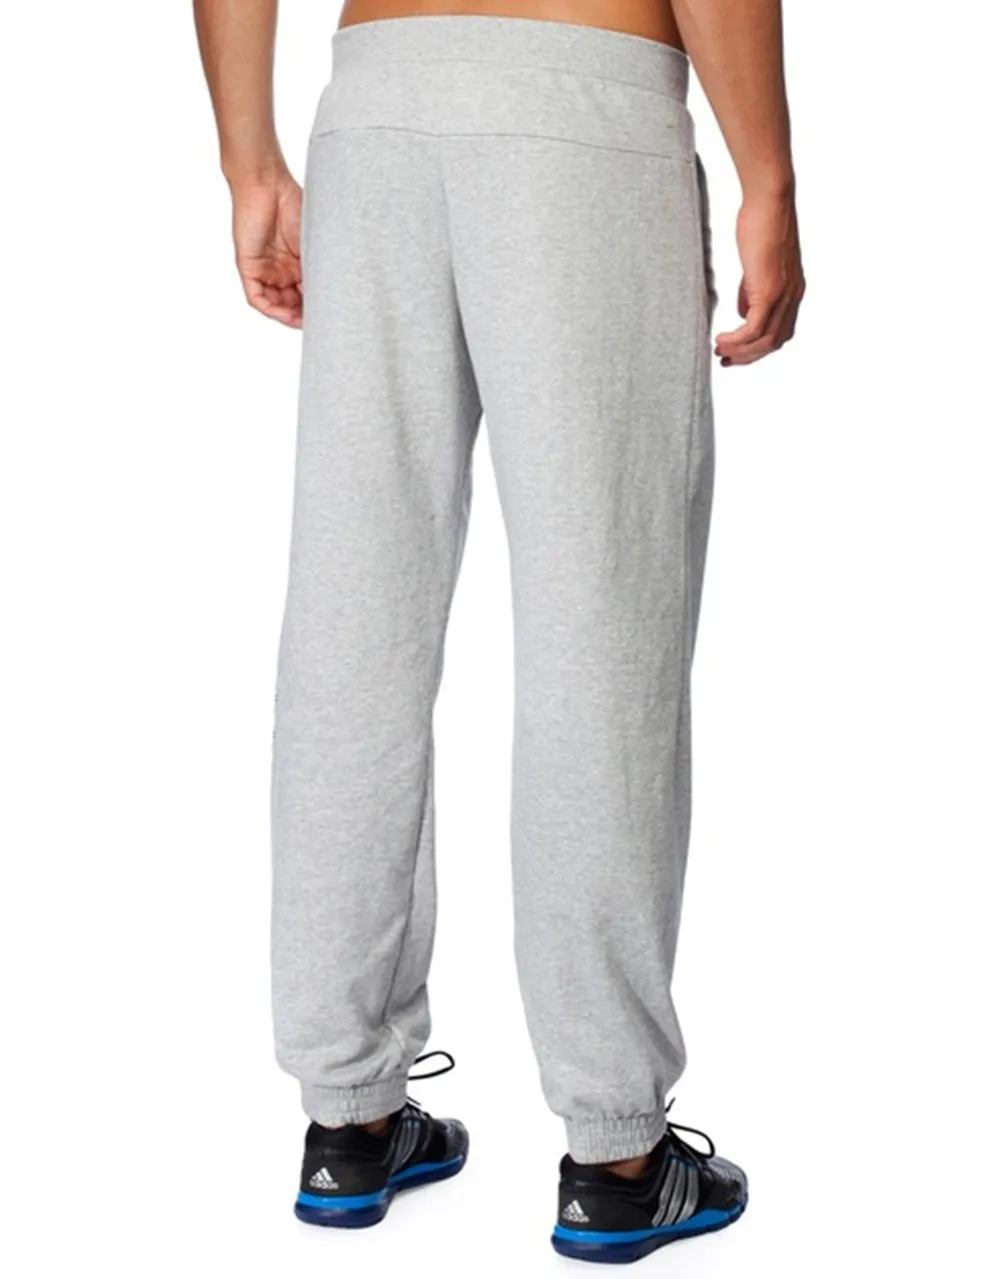 Apt037 Hot Sale Blank Mens Cotton Baggy Sweatpants Made In China - Buy ...